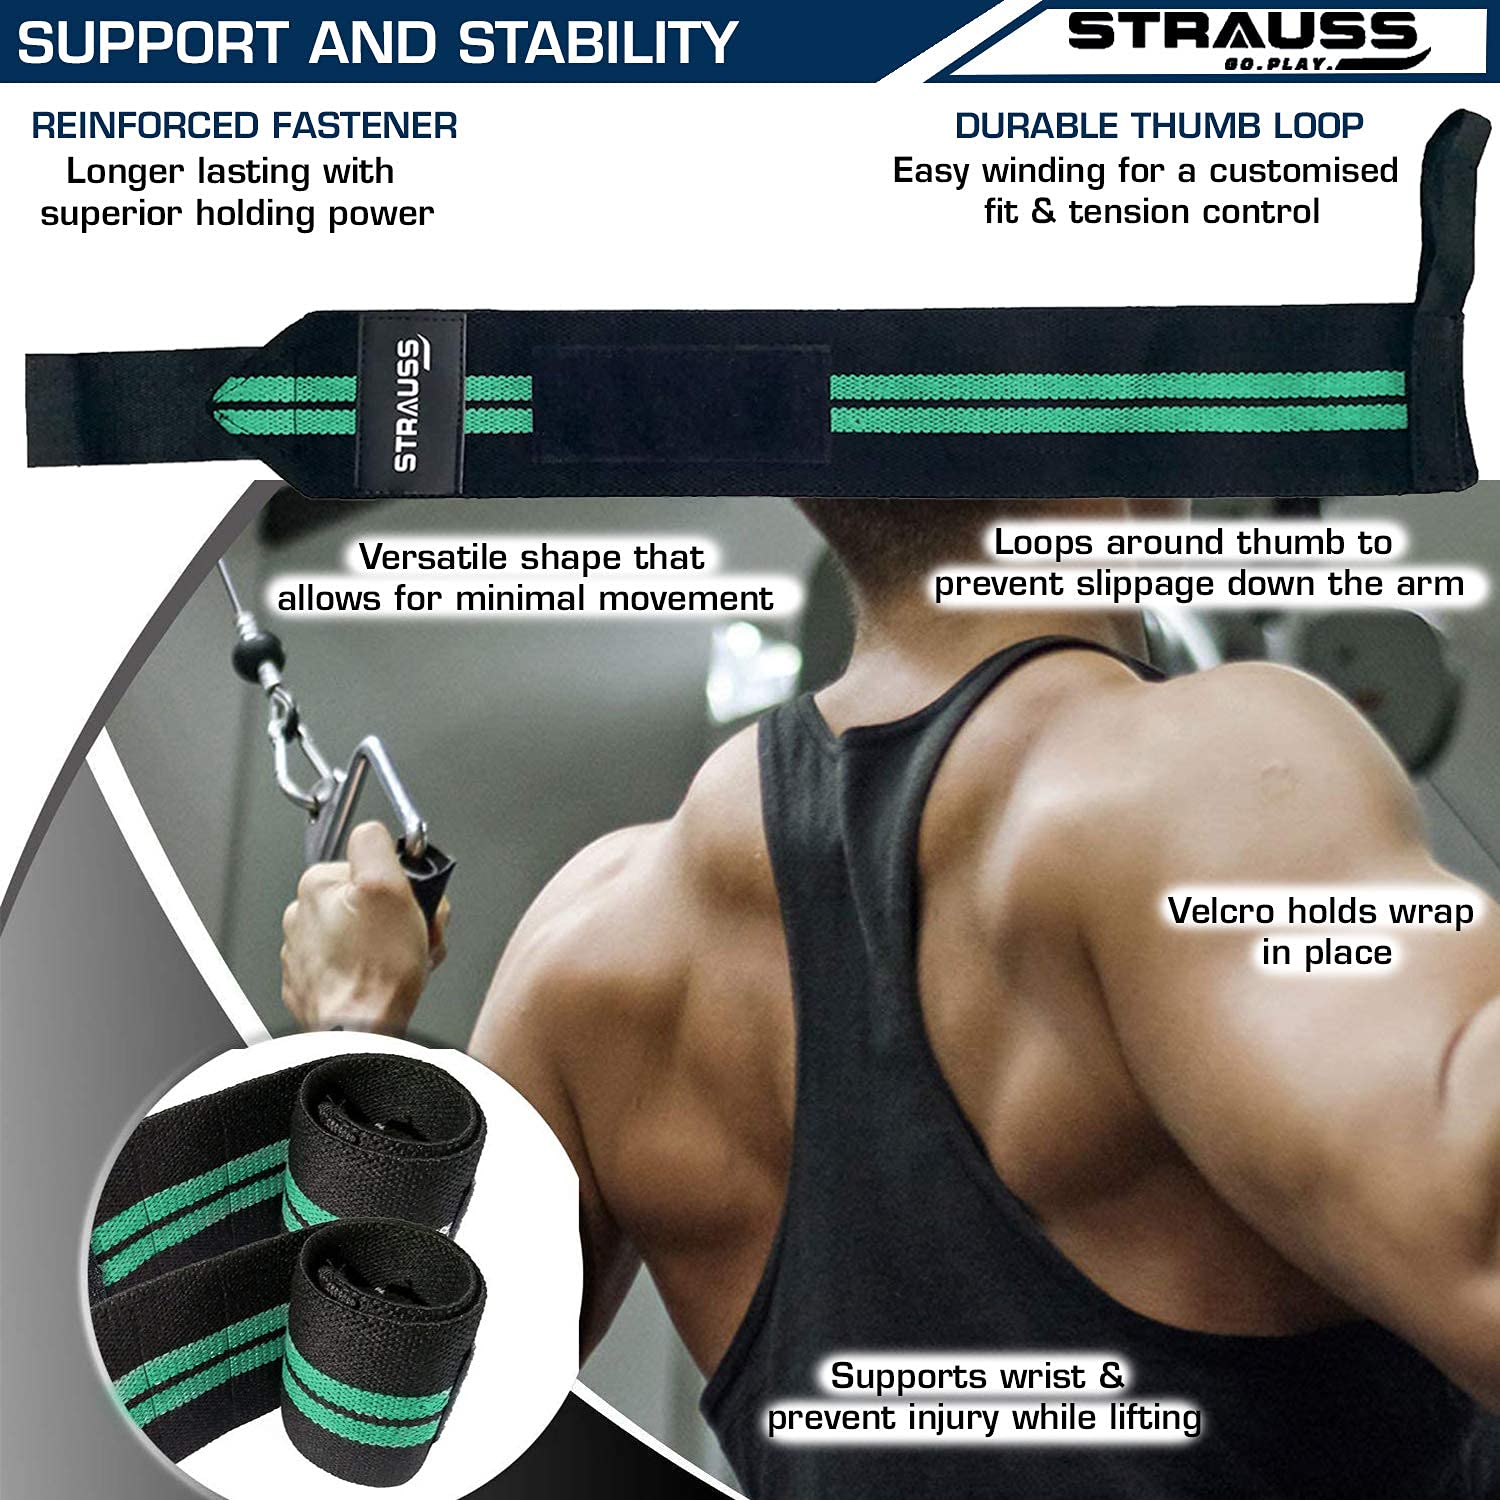 Strauss WL Cotton Wrist Supporter with Thumb Loop Straps & Closures for Gym, Workouts & Strength Training| Adjustable & Breathable with Powerful Velcro & Soft Material, (Black/Green)